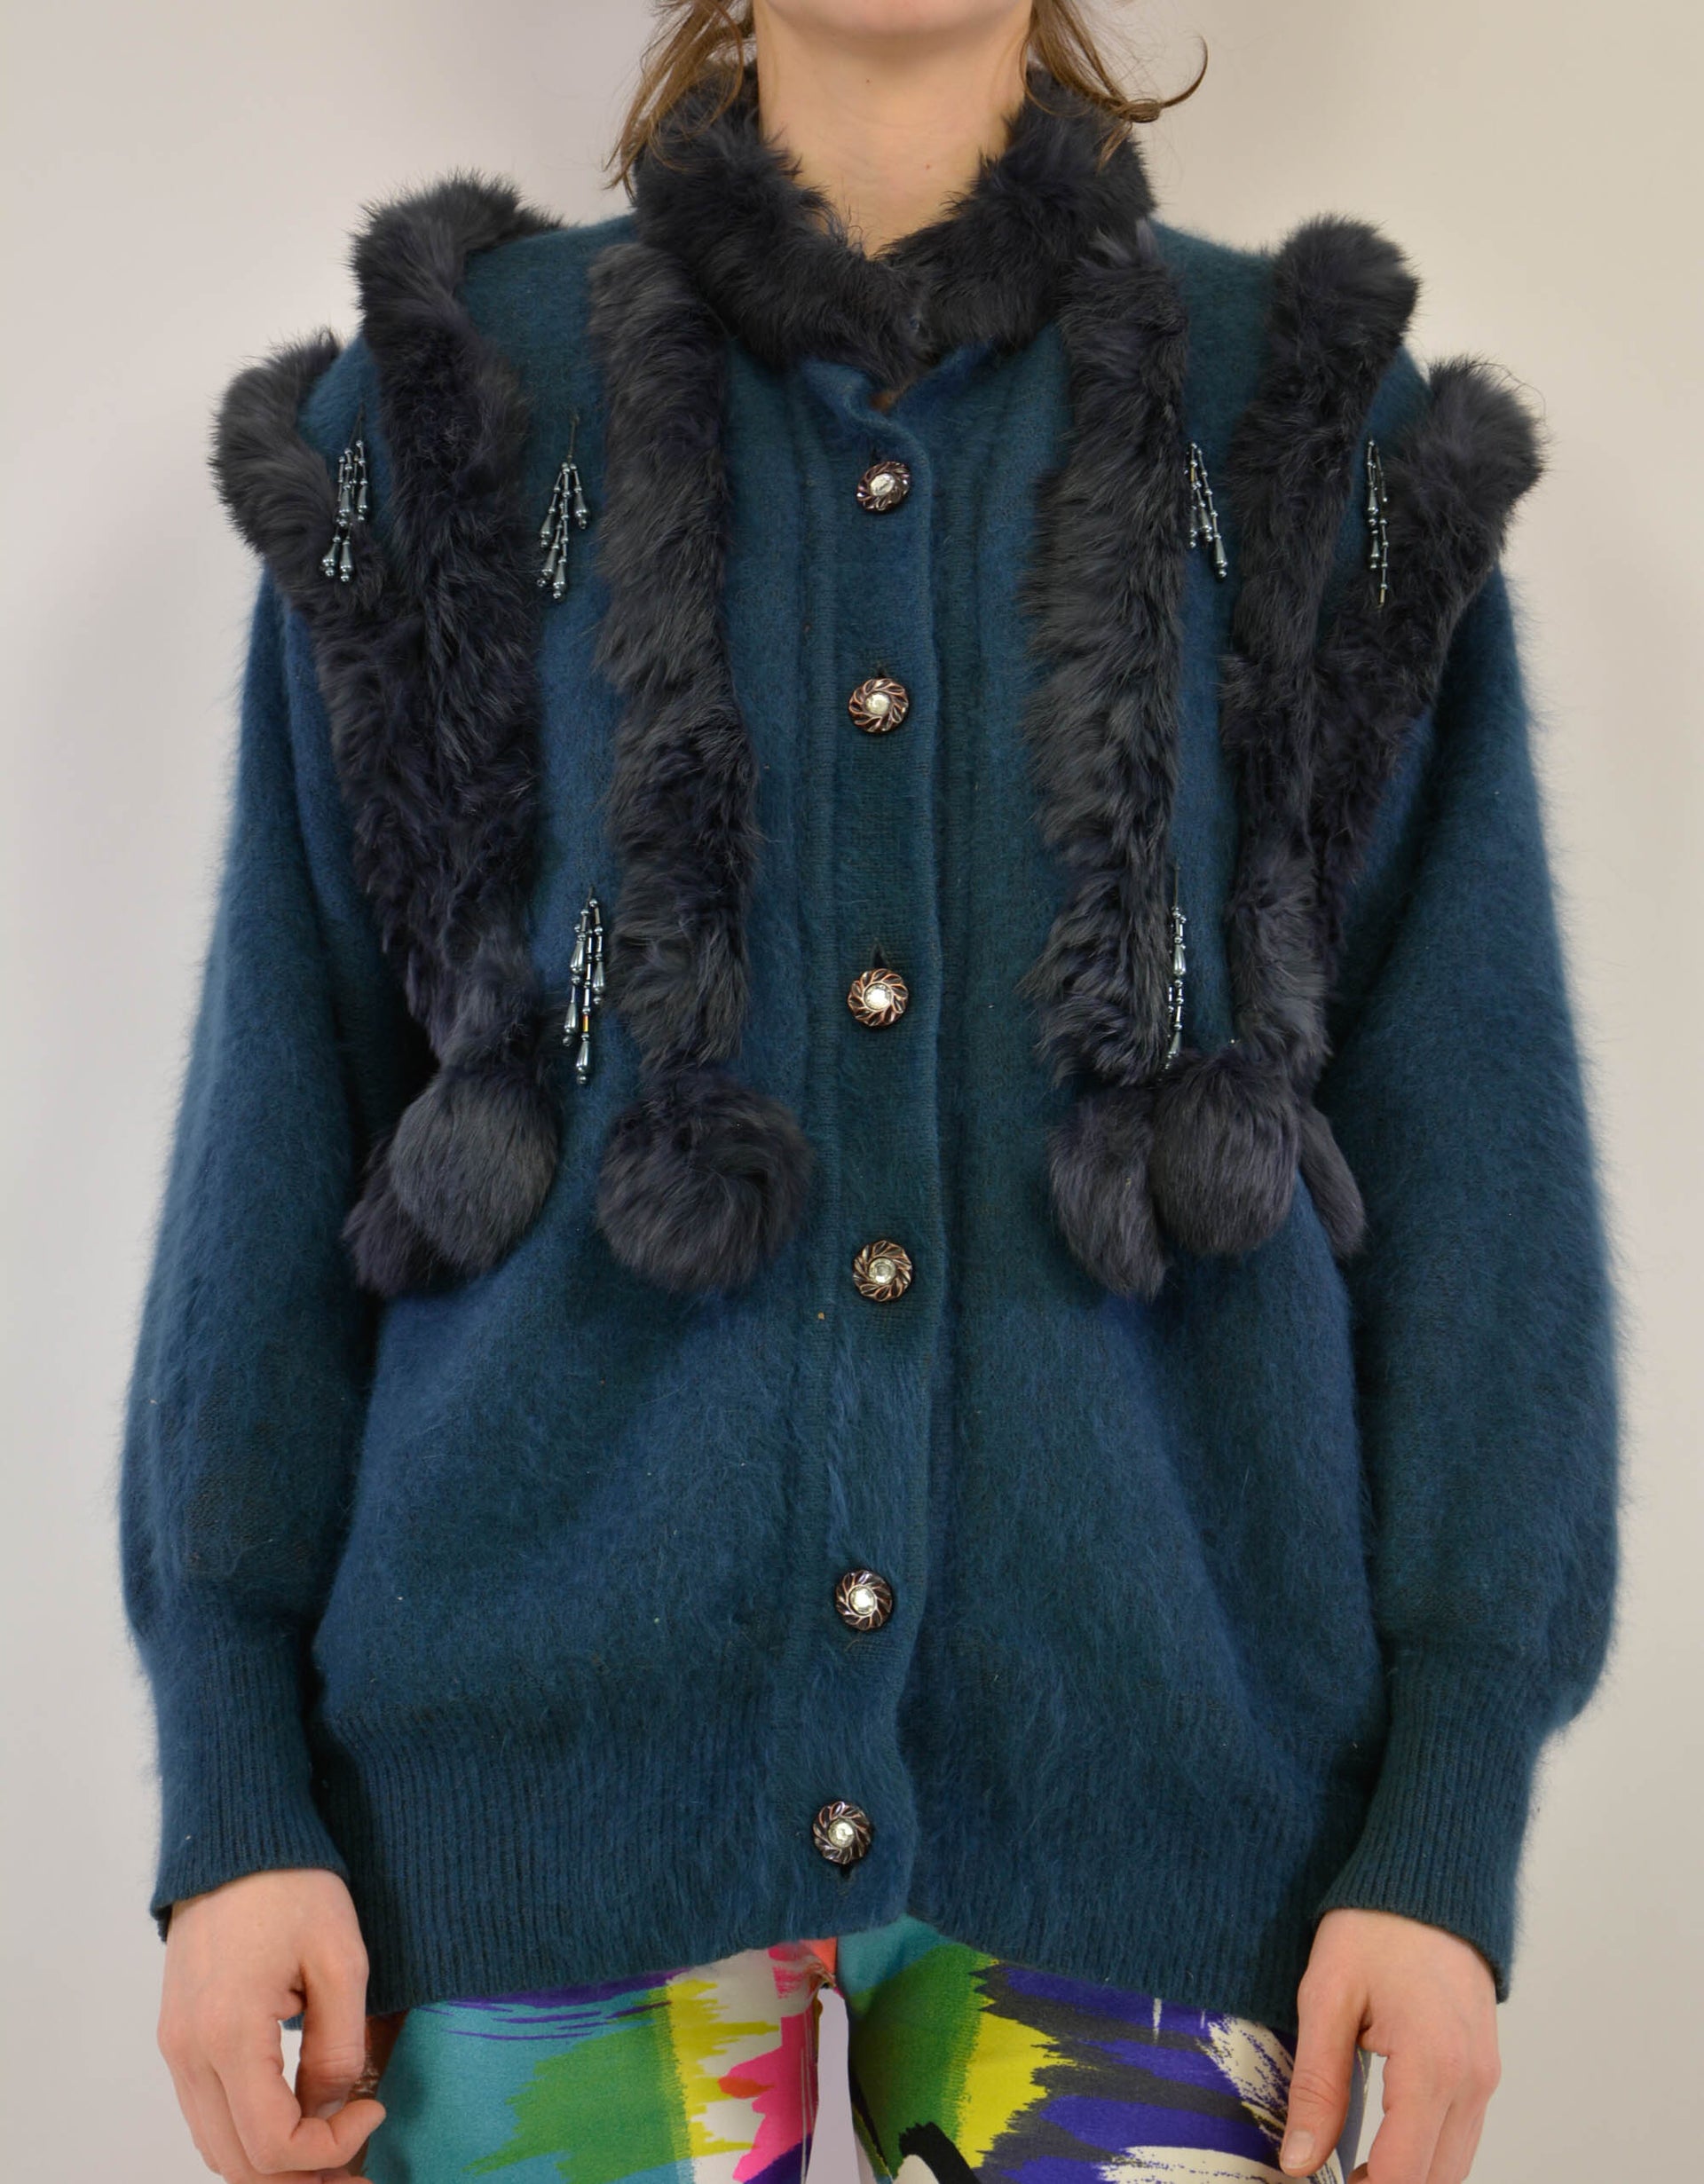 Fluffy special cardigan - PICKNWEIGHT - VINTAGE KILO STORE